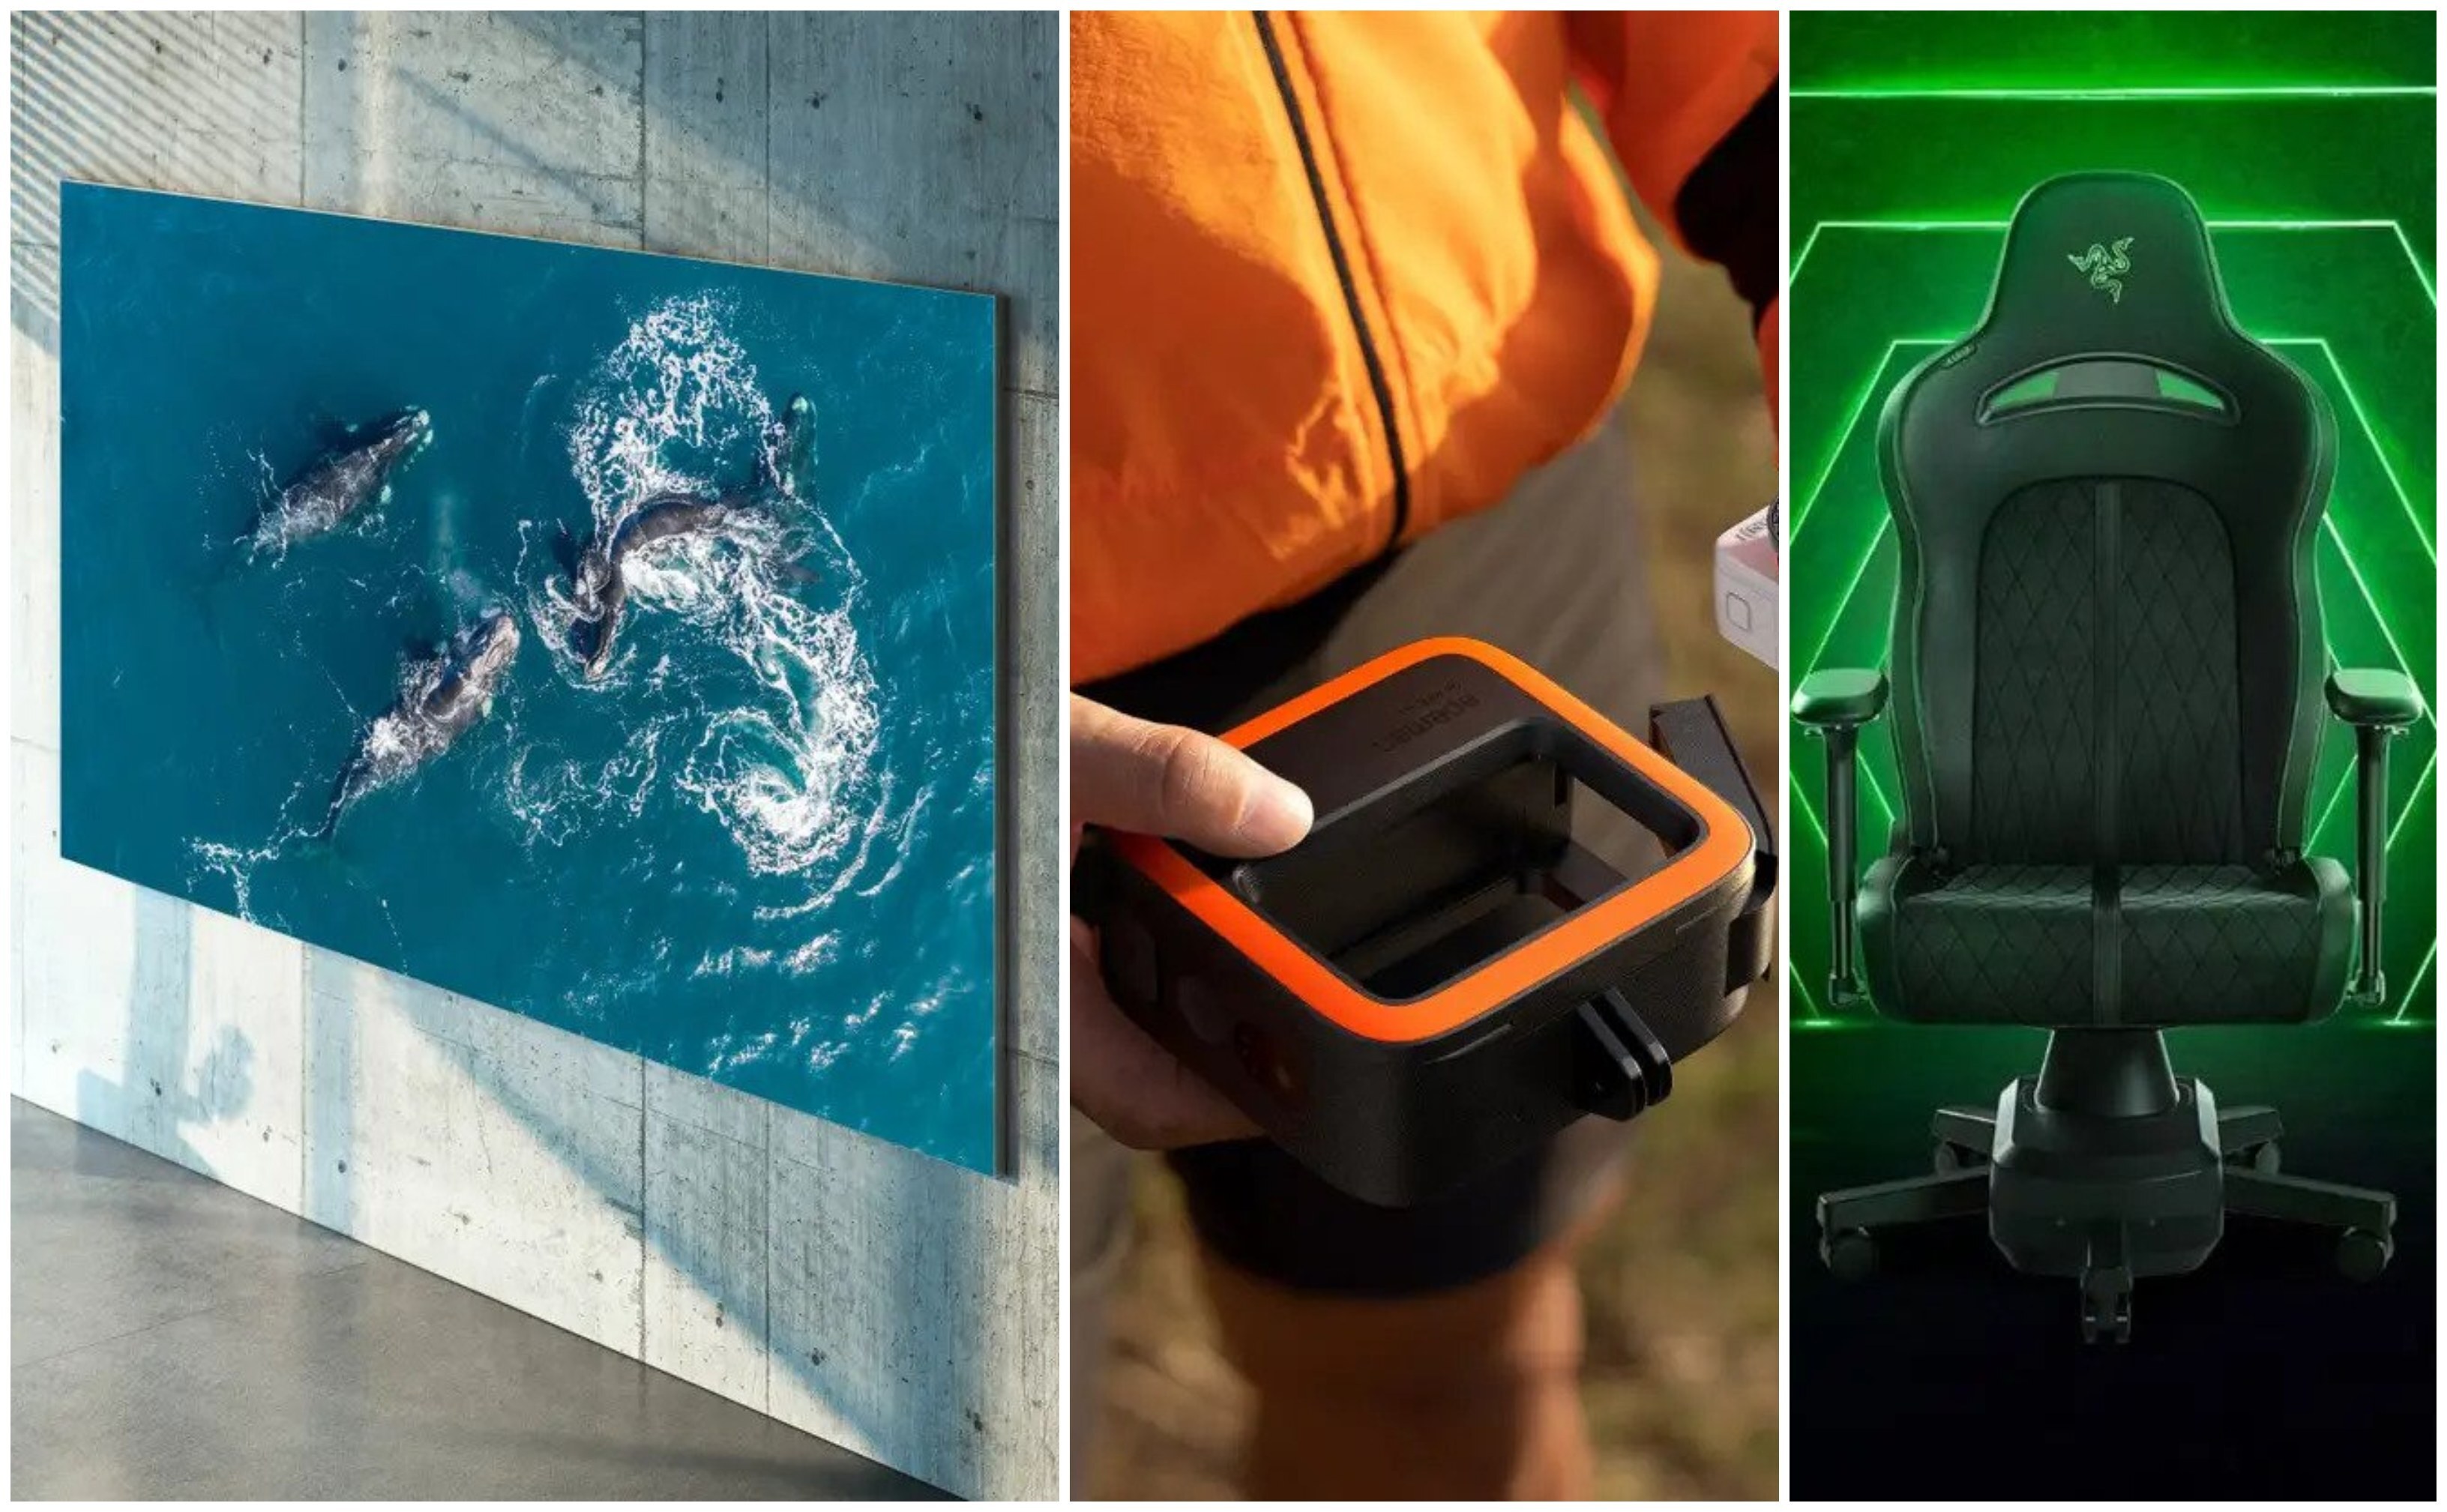 Check out some of CES 2022’s hottest gadget launches. Photos: Samsung, Apeman, Razer